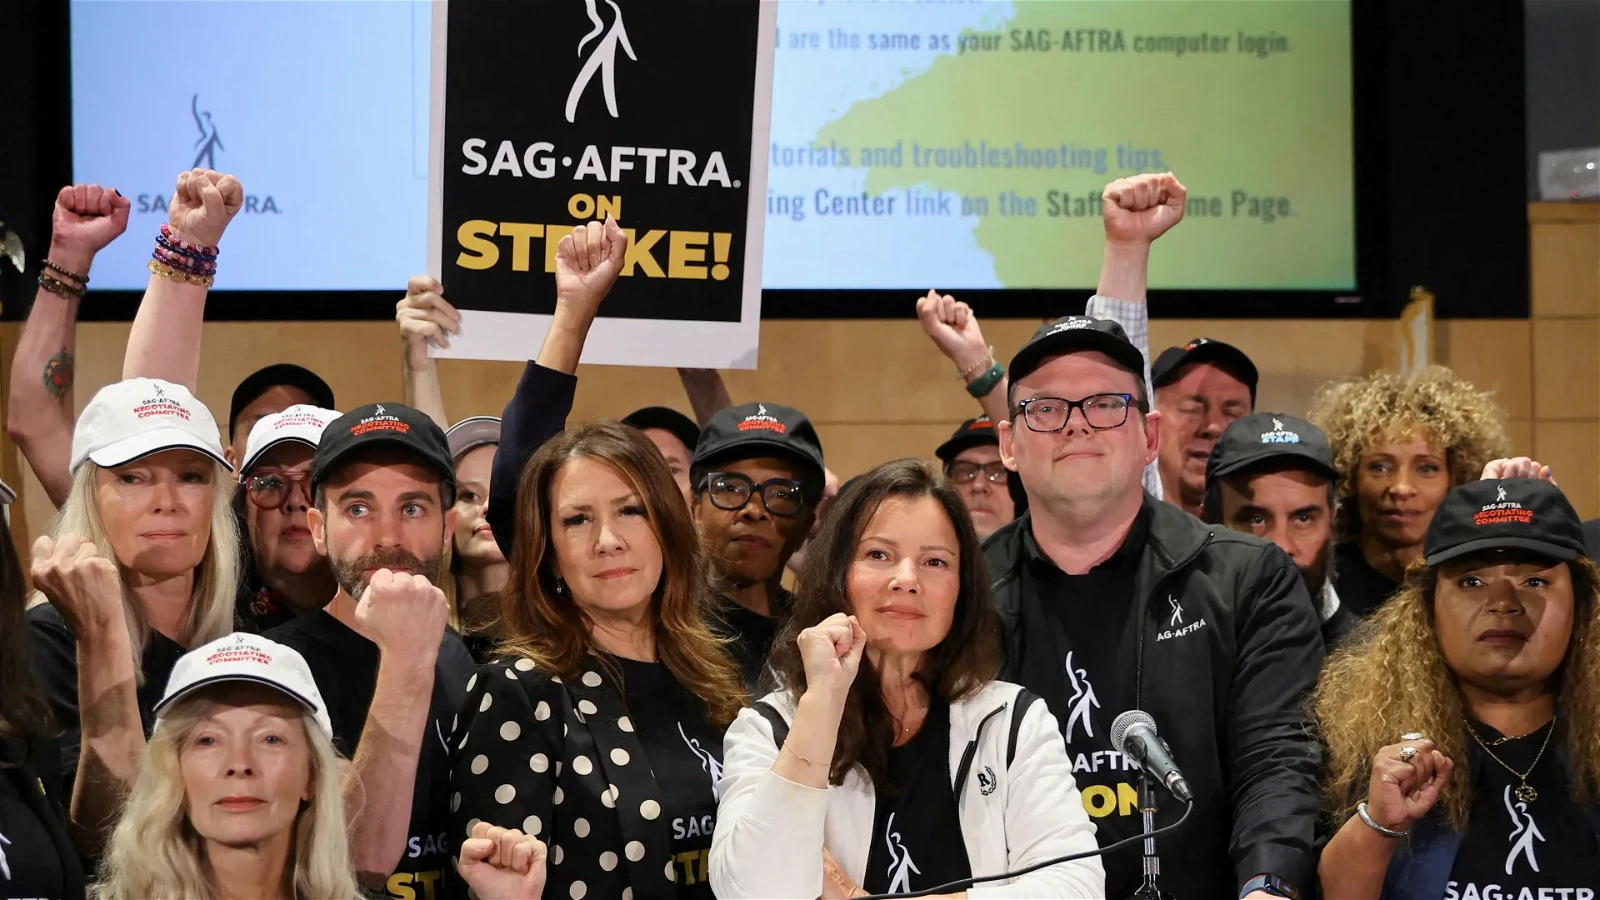 SAG-AFTRA members are demanding better wages, rest periods, safety protections, and safeguards against the unregulated use of AI in video game contract negotiations.